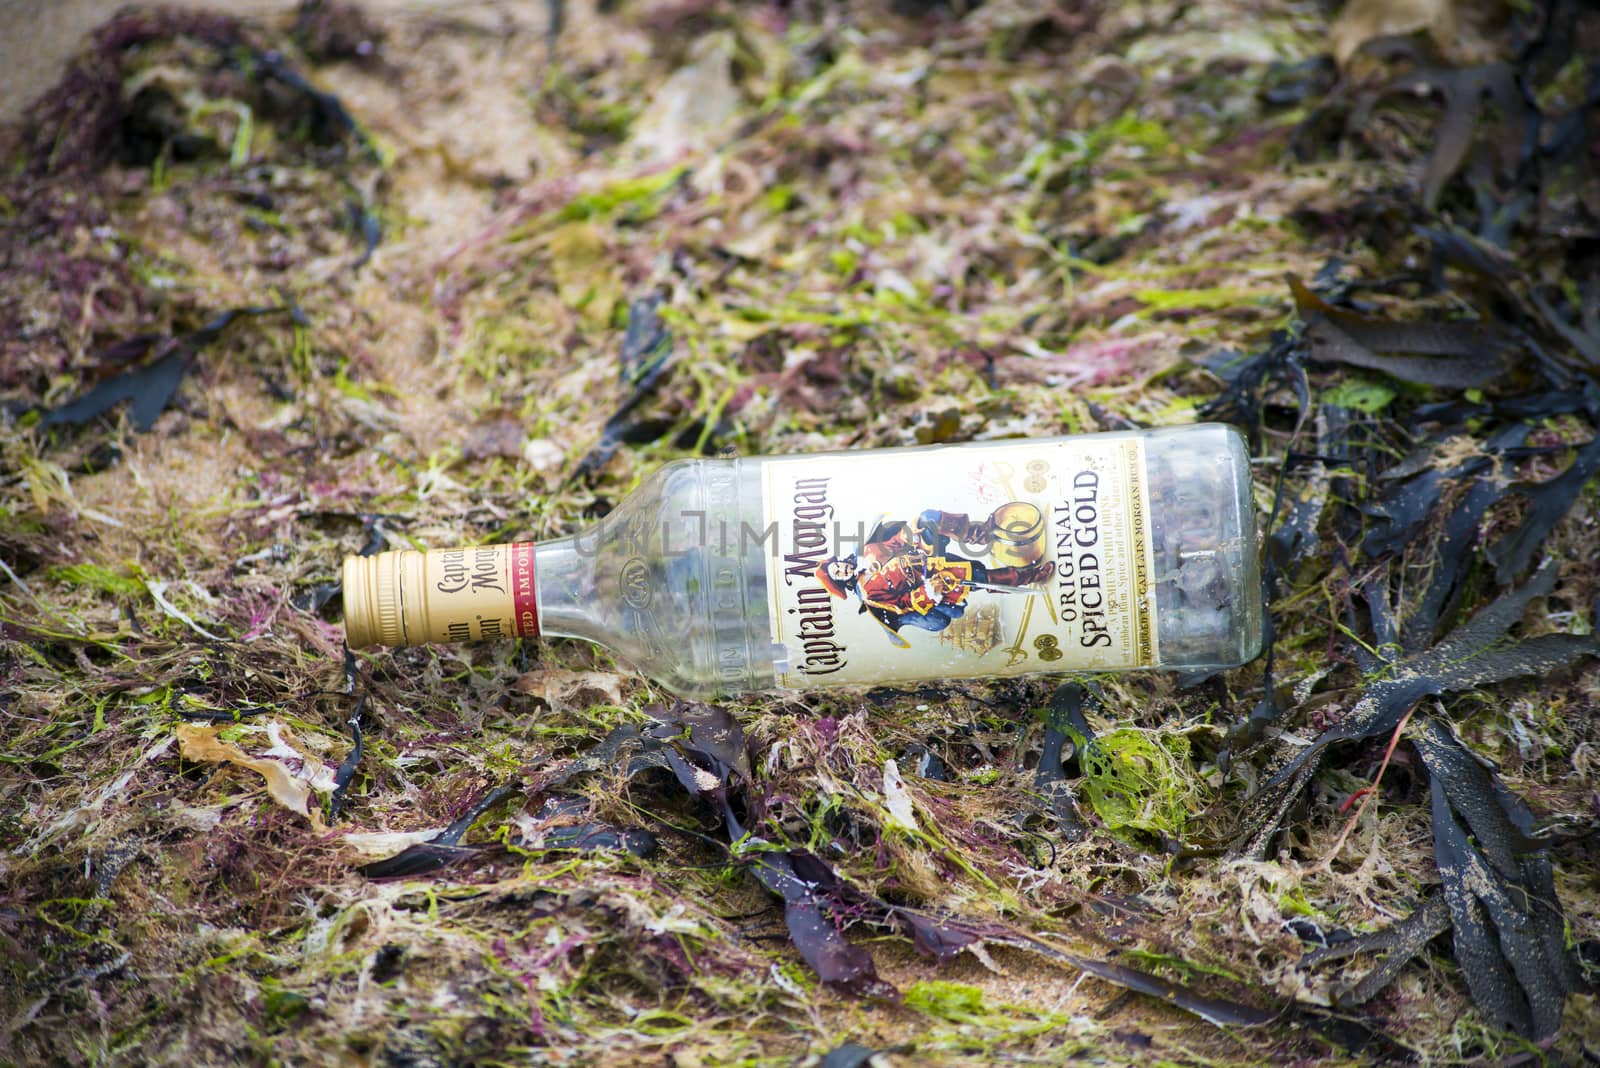 captain morgan bottle washed up on beach full of seaweed